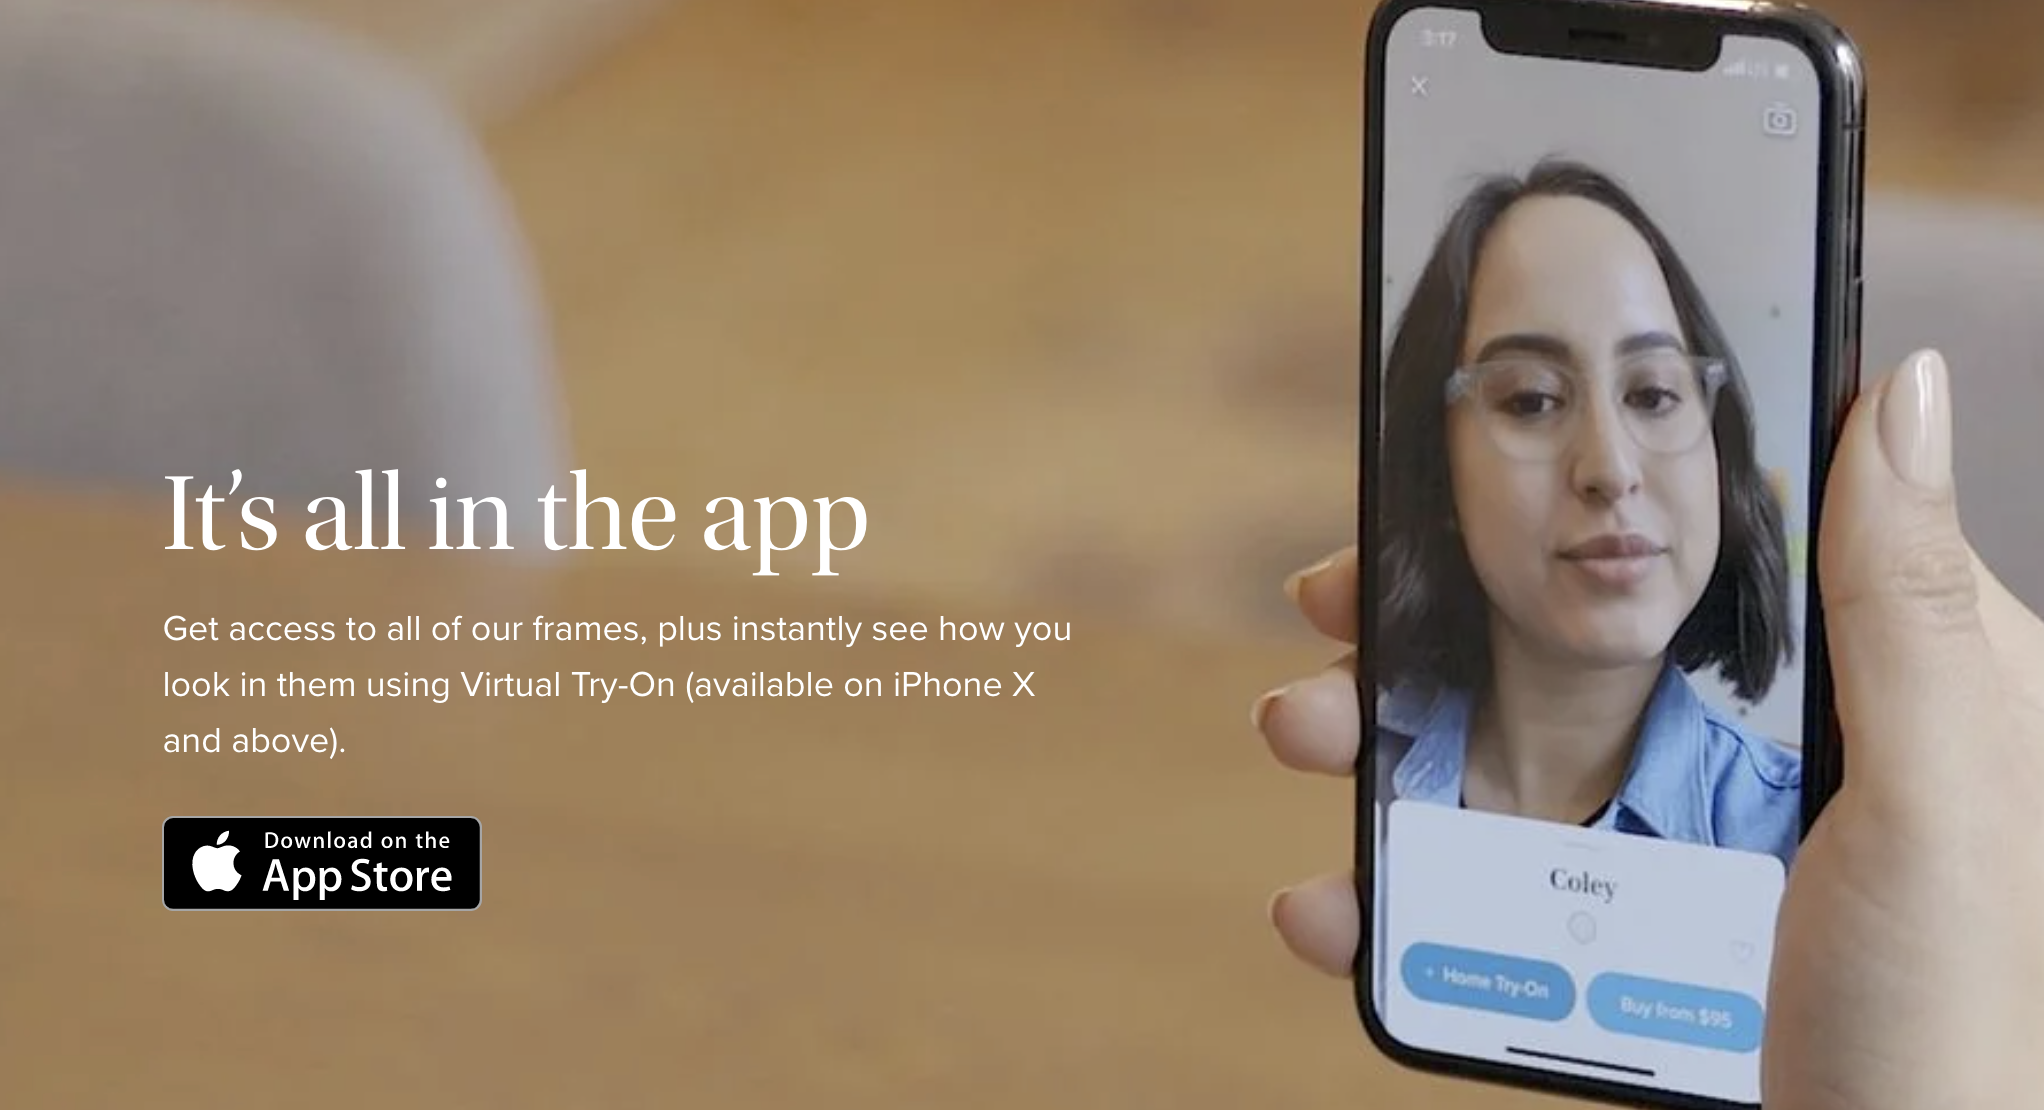 Warby Parker allows for virtual try-on as a phygital marketing strategy